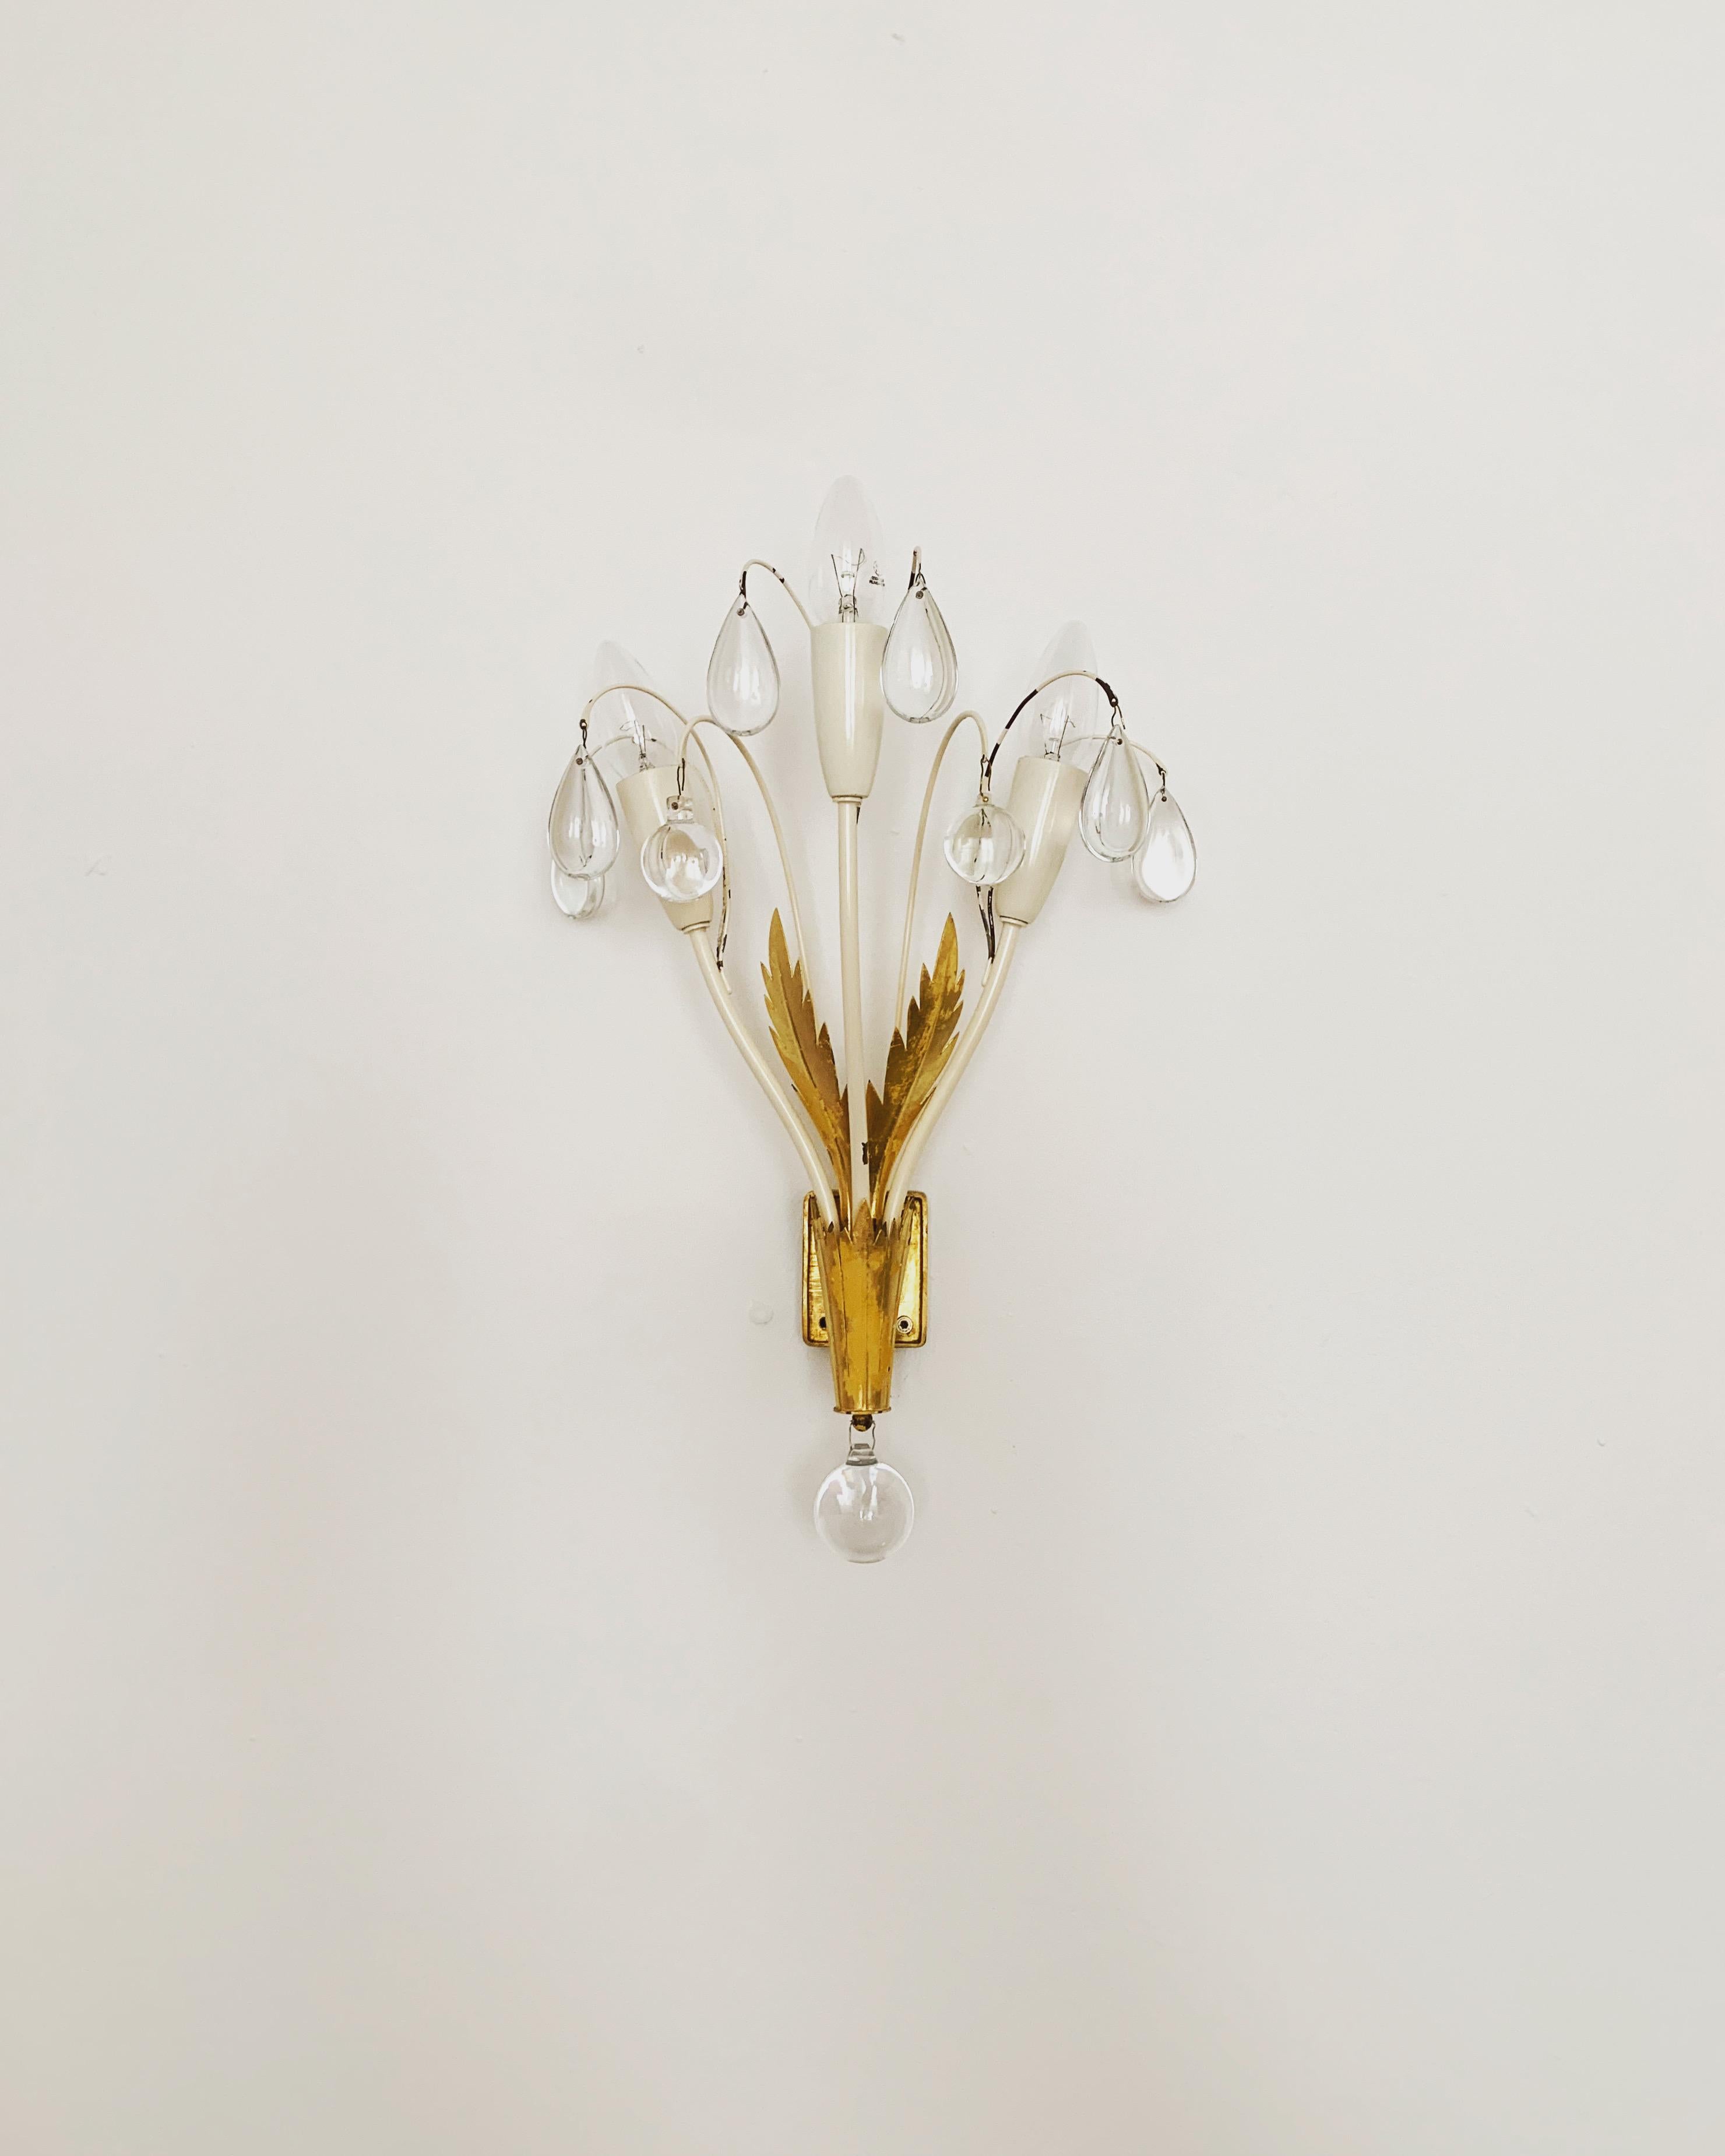 Extremely beautiful wall lamps from the 1950s.
The high-quality workmanship and the very noble material impress at first sight.
Exceptionally beautiful design.
The sparkling stones spread a sensational light.

Manufacturer: Vereinigte